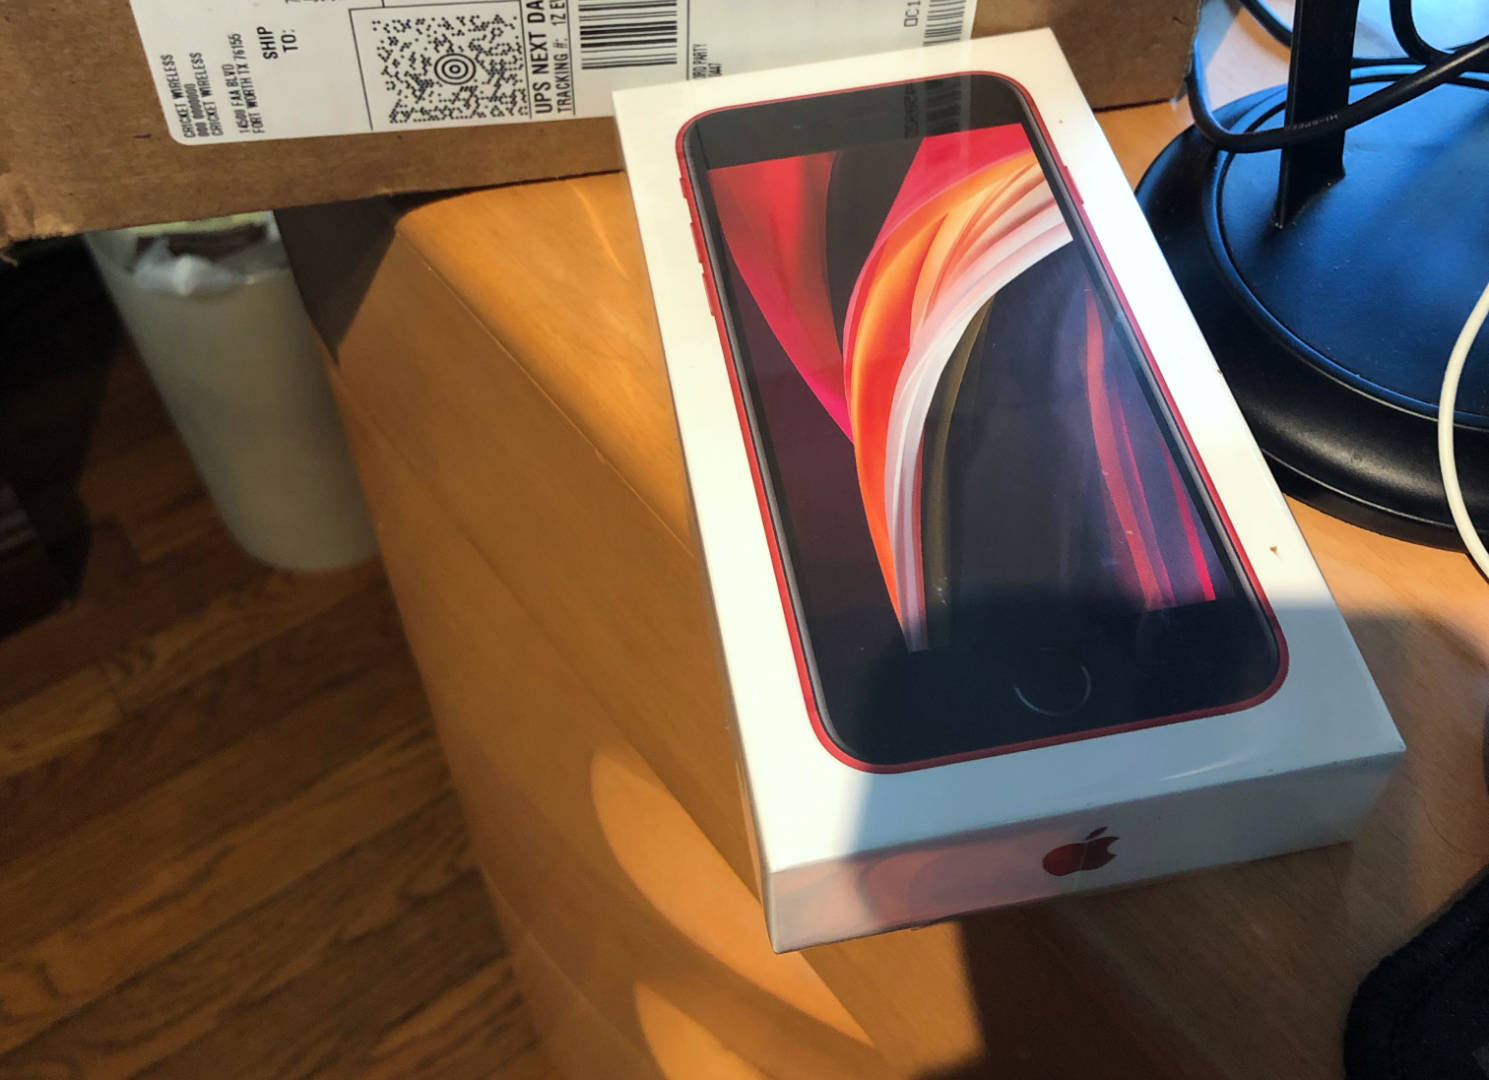 Jenni's new iPhone SE (2020), 64GB, (PRODUCT)RED waiting to be opened!